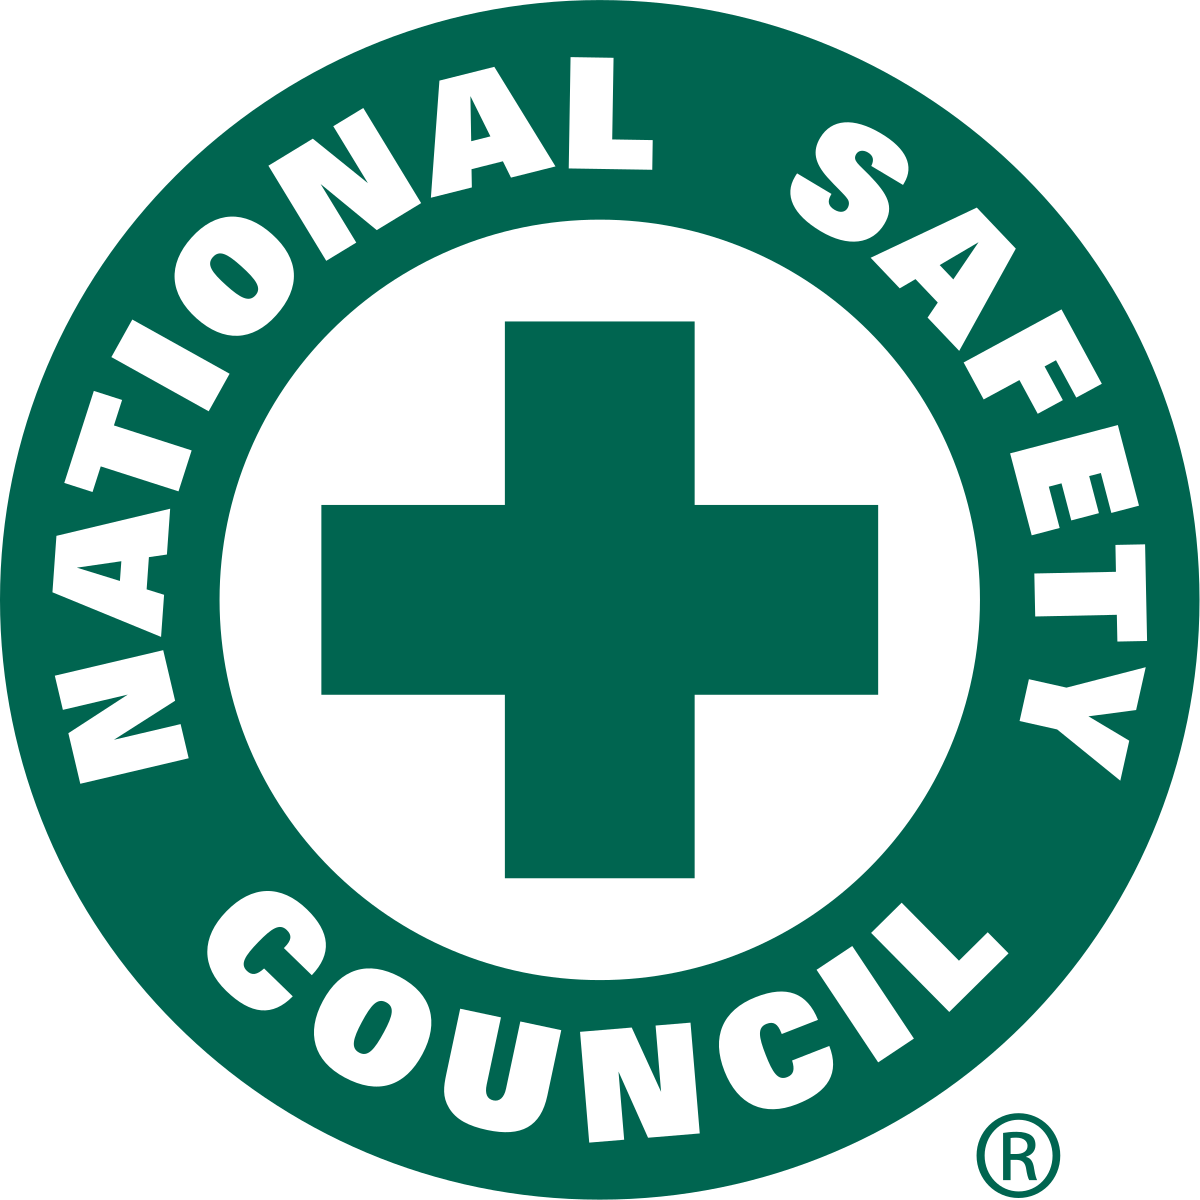 National Safety Council (NSC)